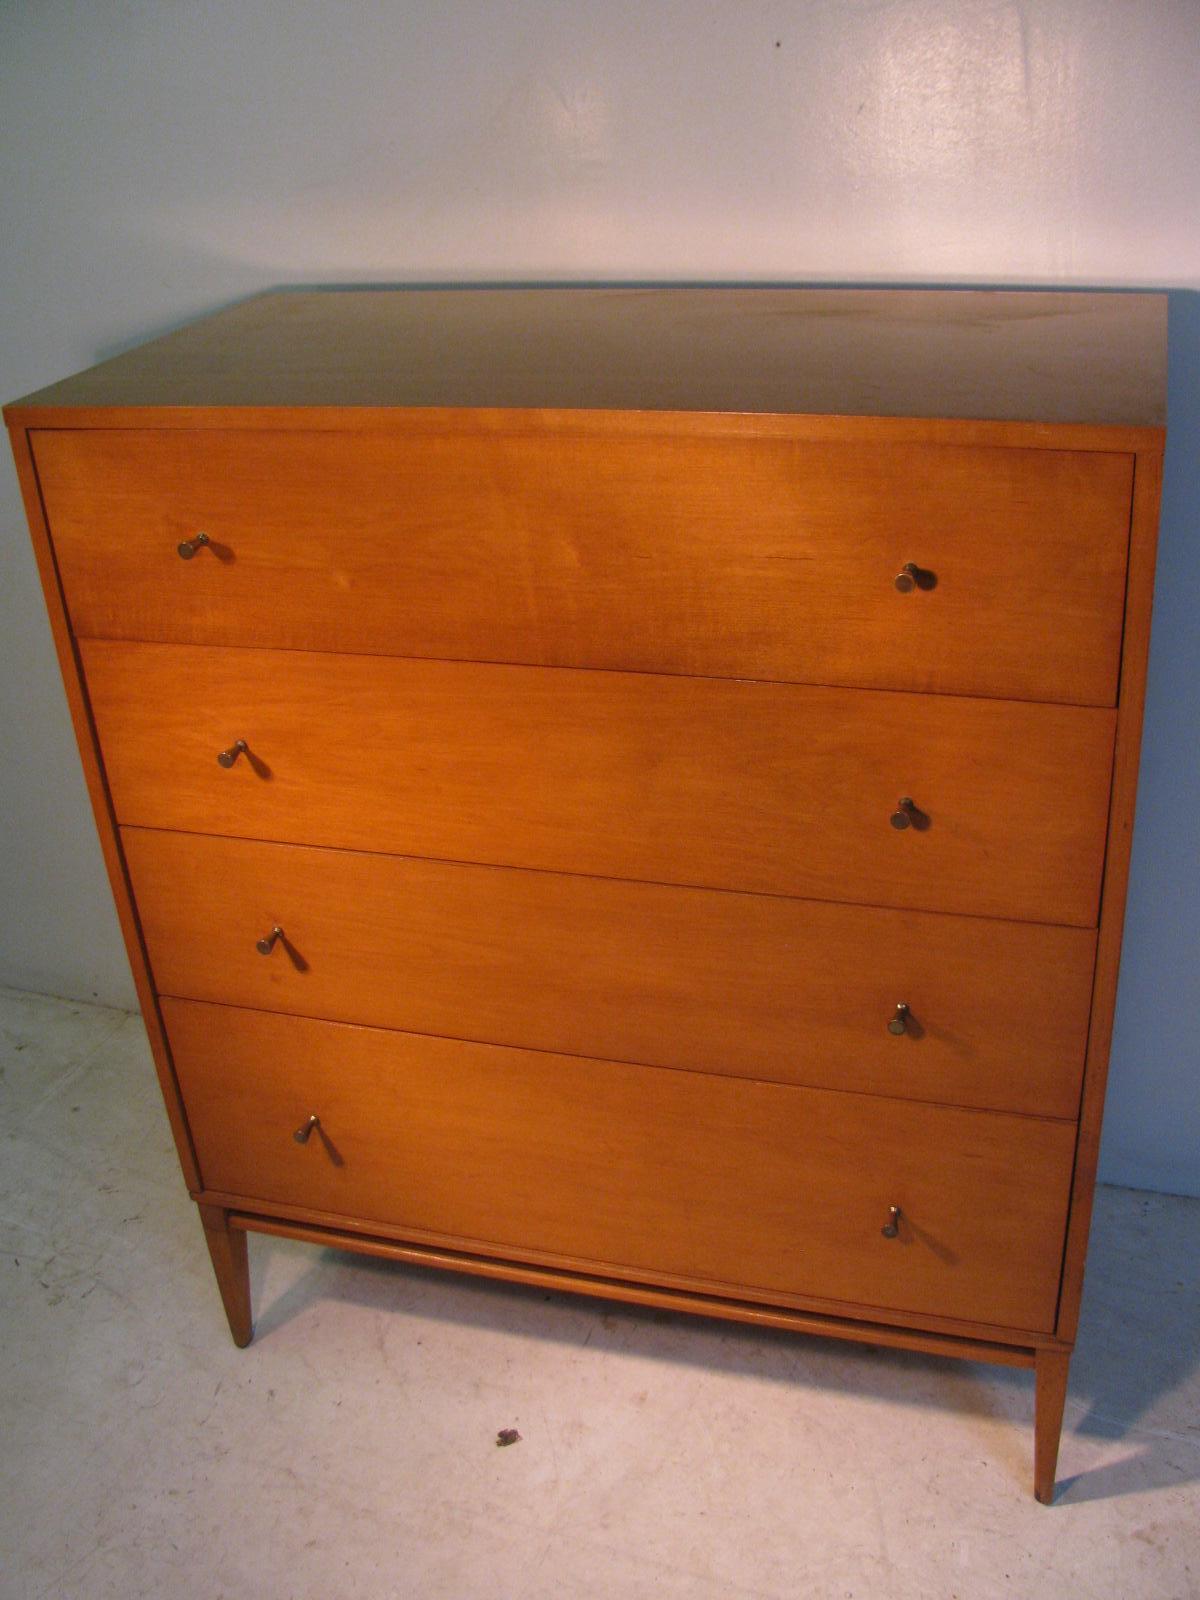 Simple and elegant 4-drawer dresser by Paul McCobb. Signature hour glass pulls with a large drawer at the bottom all in Birch. Very tight well constructed piece, signed on top drawer. In excellent vintage condition with minimal wear 